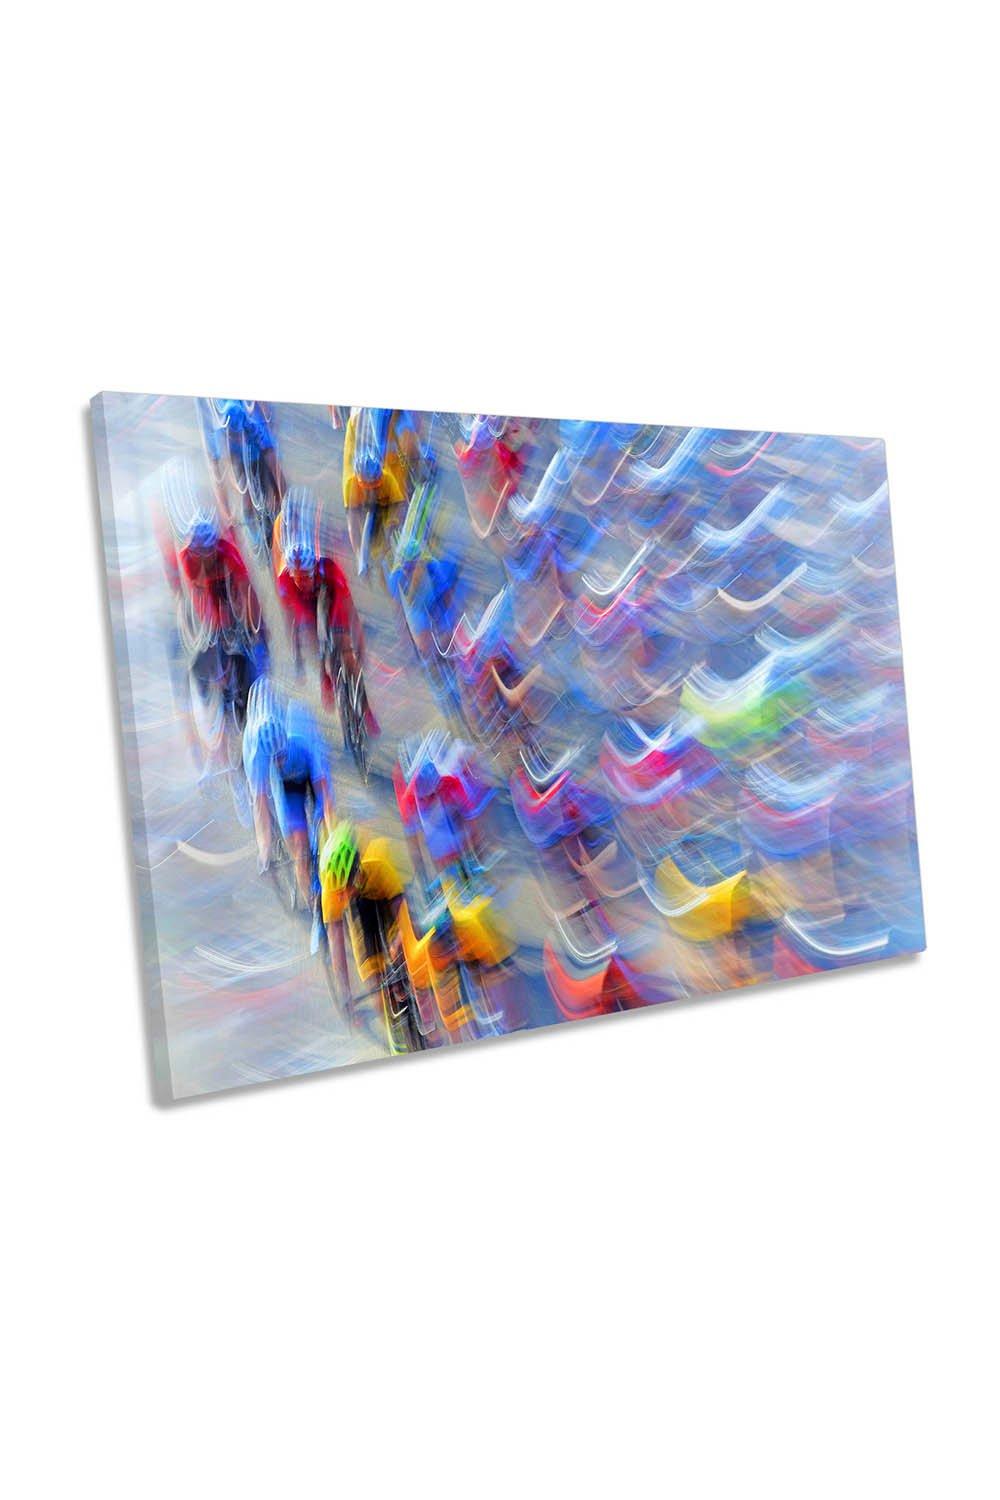 Waves Bike Racer Cycling Abstract Canvas Wall Art Picture Print